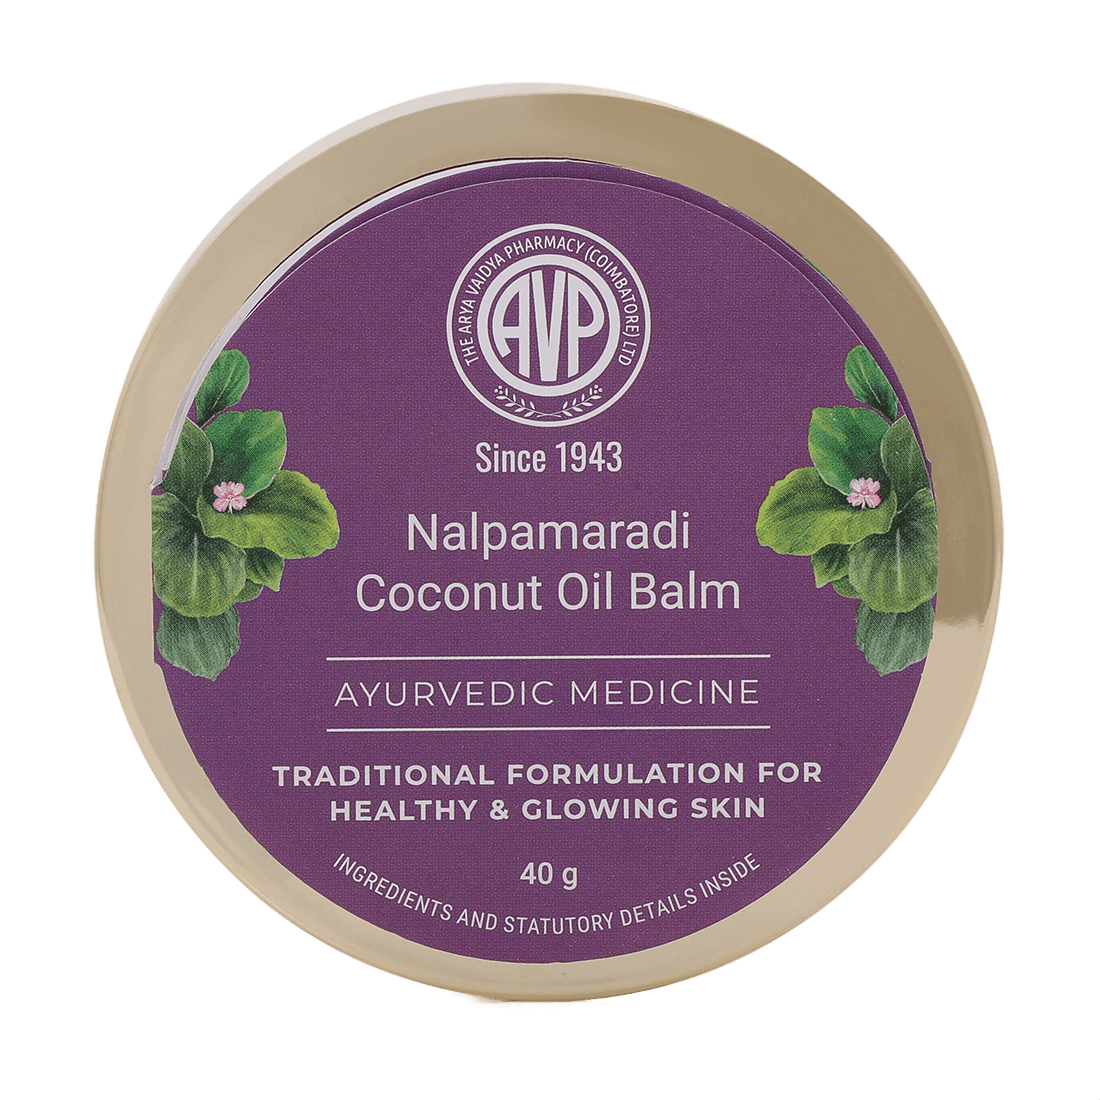 Nalpamaradi Coconut Oil Balm Helps Detan, Reduces Dark Spots, Enhances Natural Skin Tone and Protects Skin from The Sun And Pollution